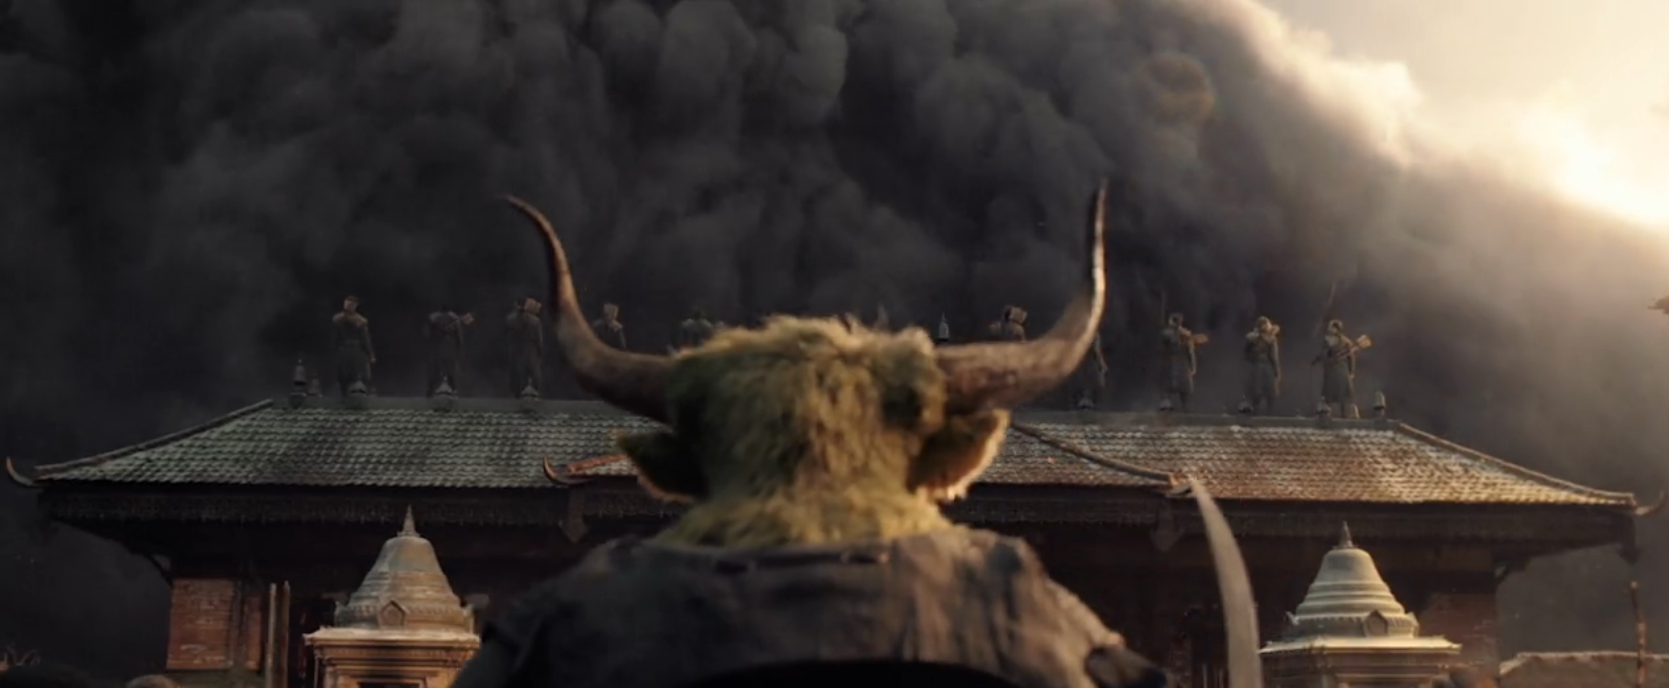 Doctor Strange in the Multiverse of Madness: Who's the Green Bull Guy?